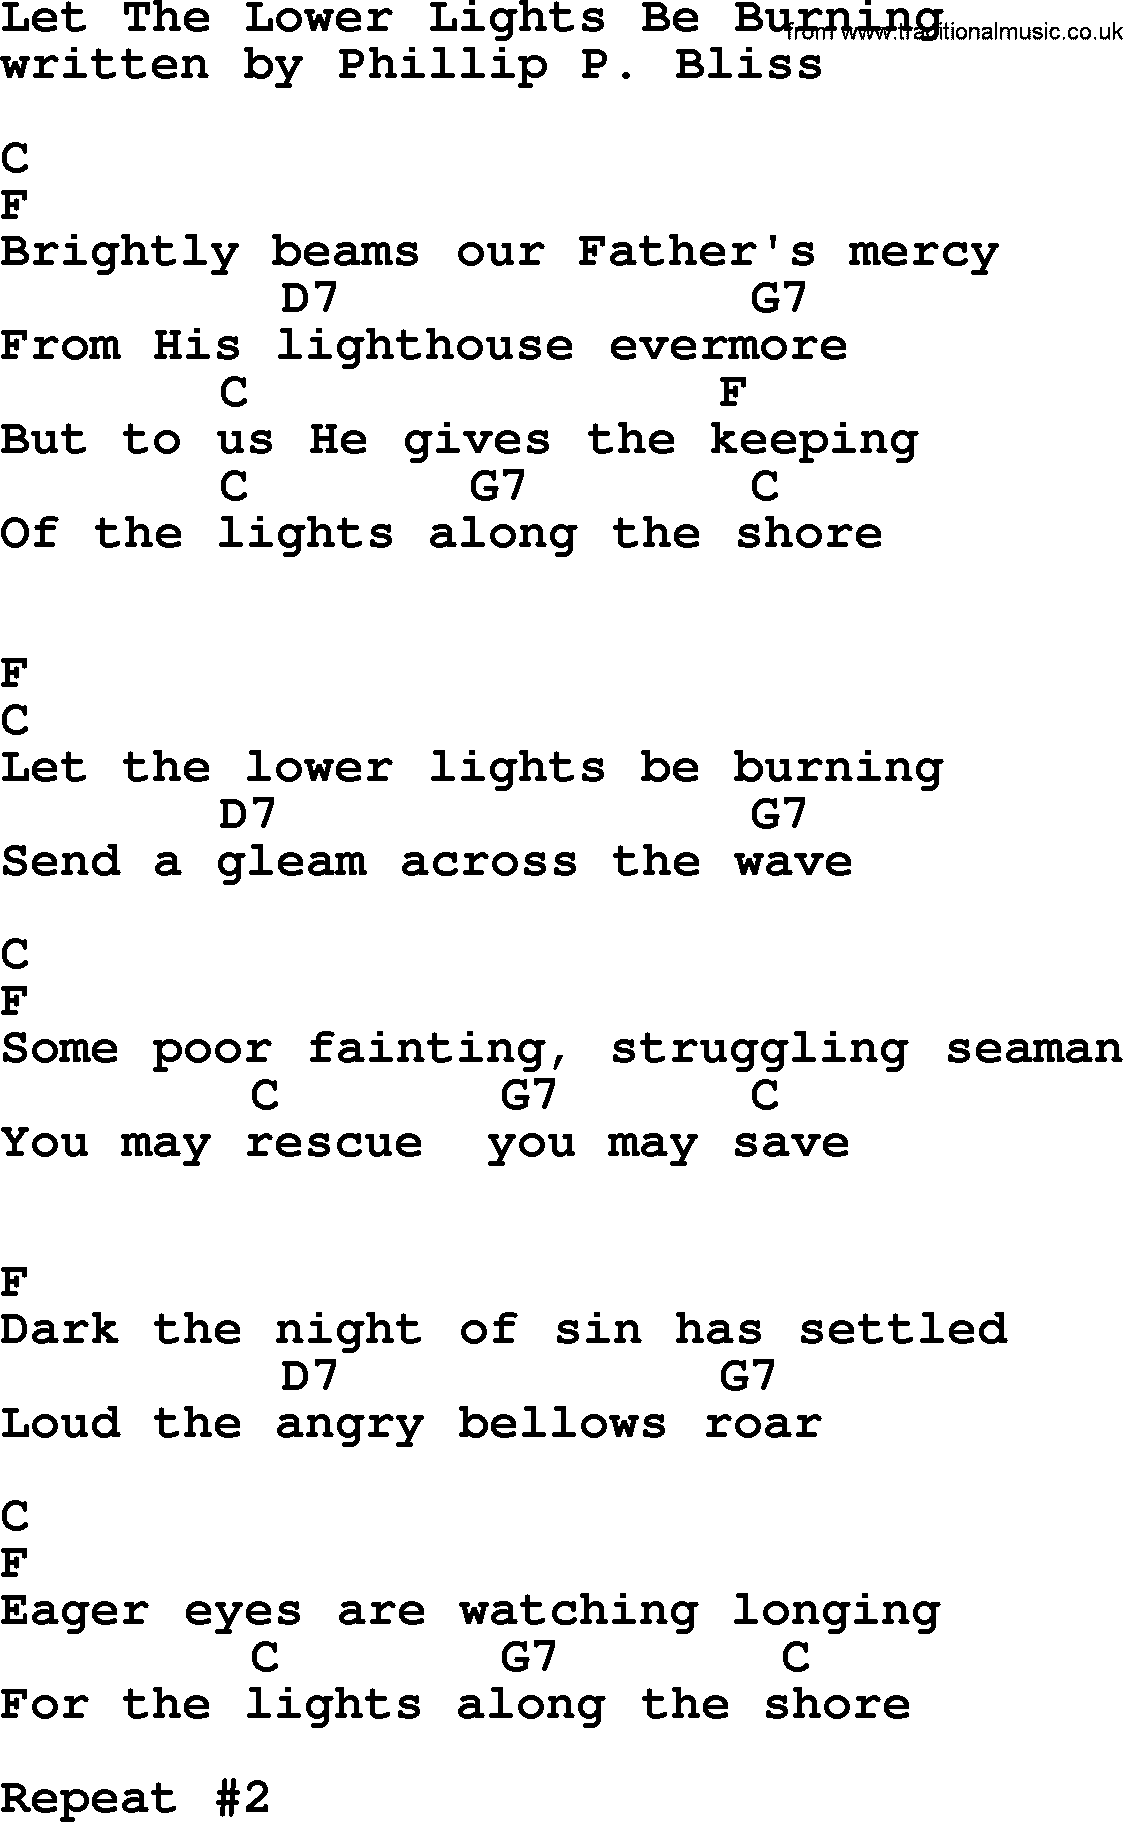 Johnny Cash song Let The Lower Lights Be Burning, lyrics and chords